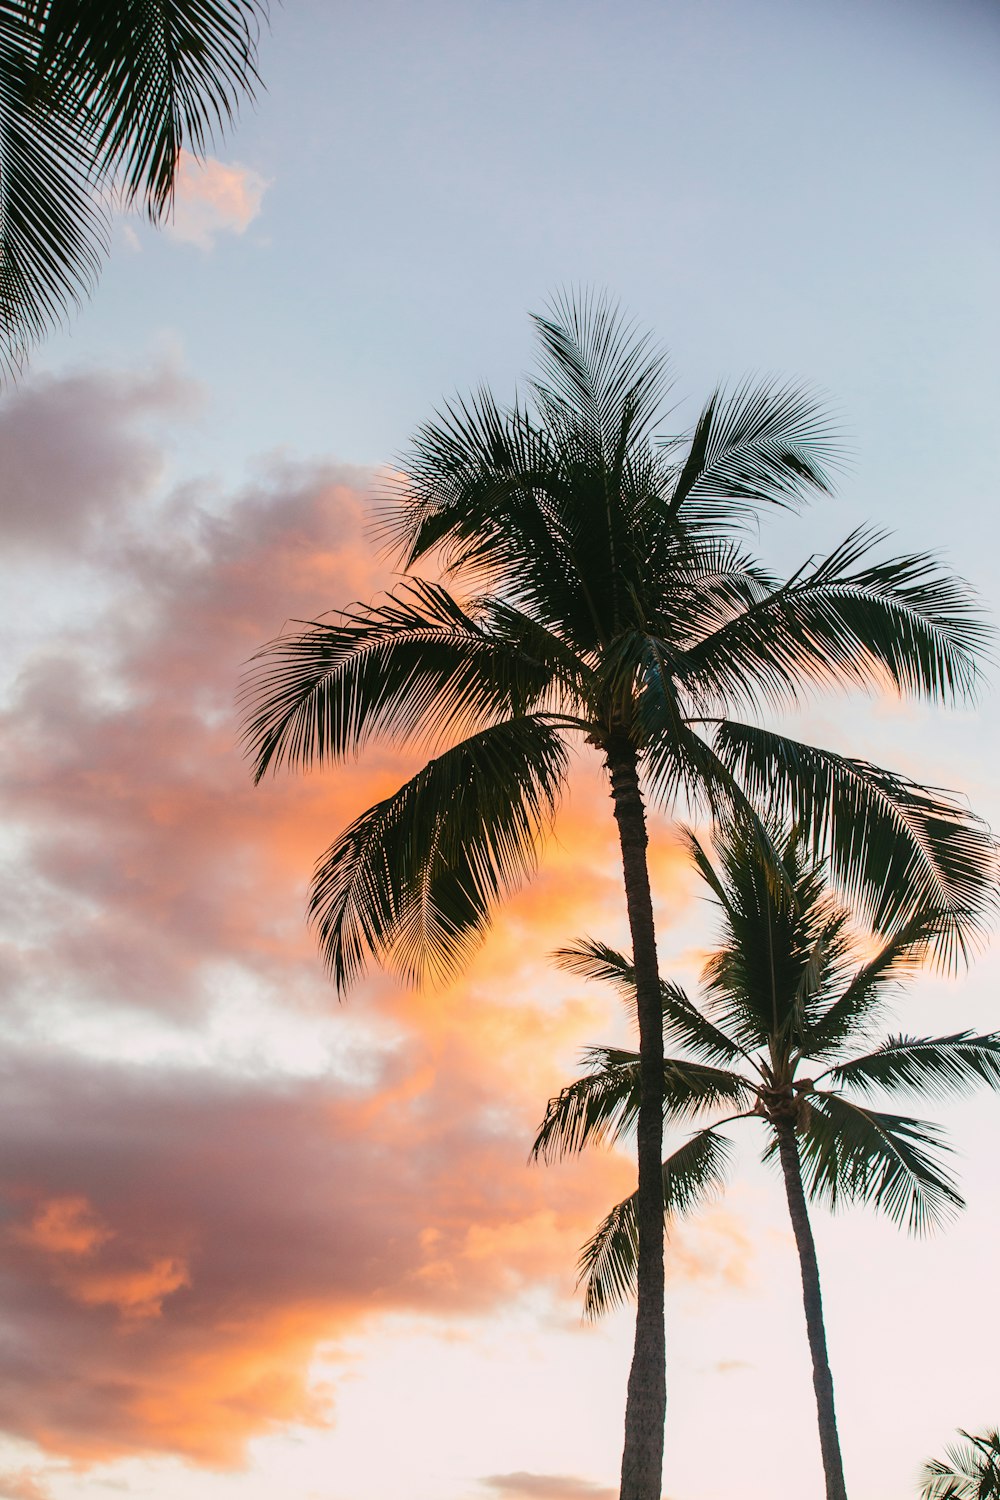 Palm Tree Sunset Pictures | Download Free Images on Unsplash